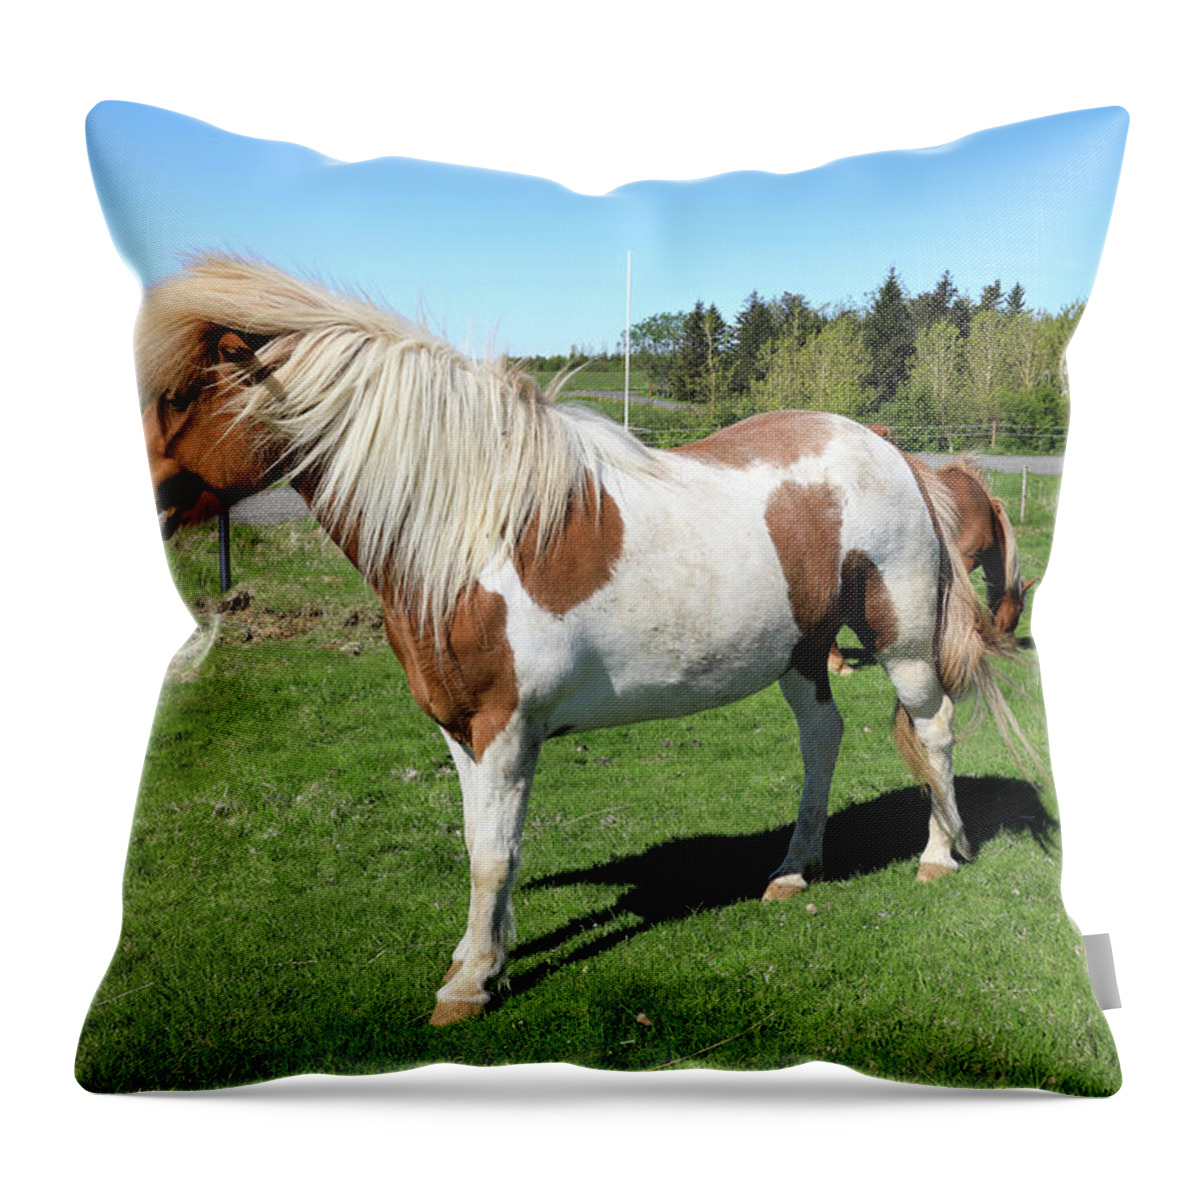 Horse Throw Pillow featuring the photograph Icelandic Horse by Richard Krebs